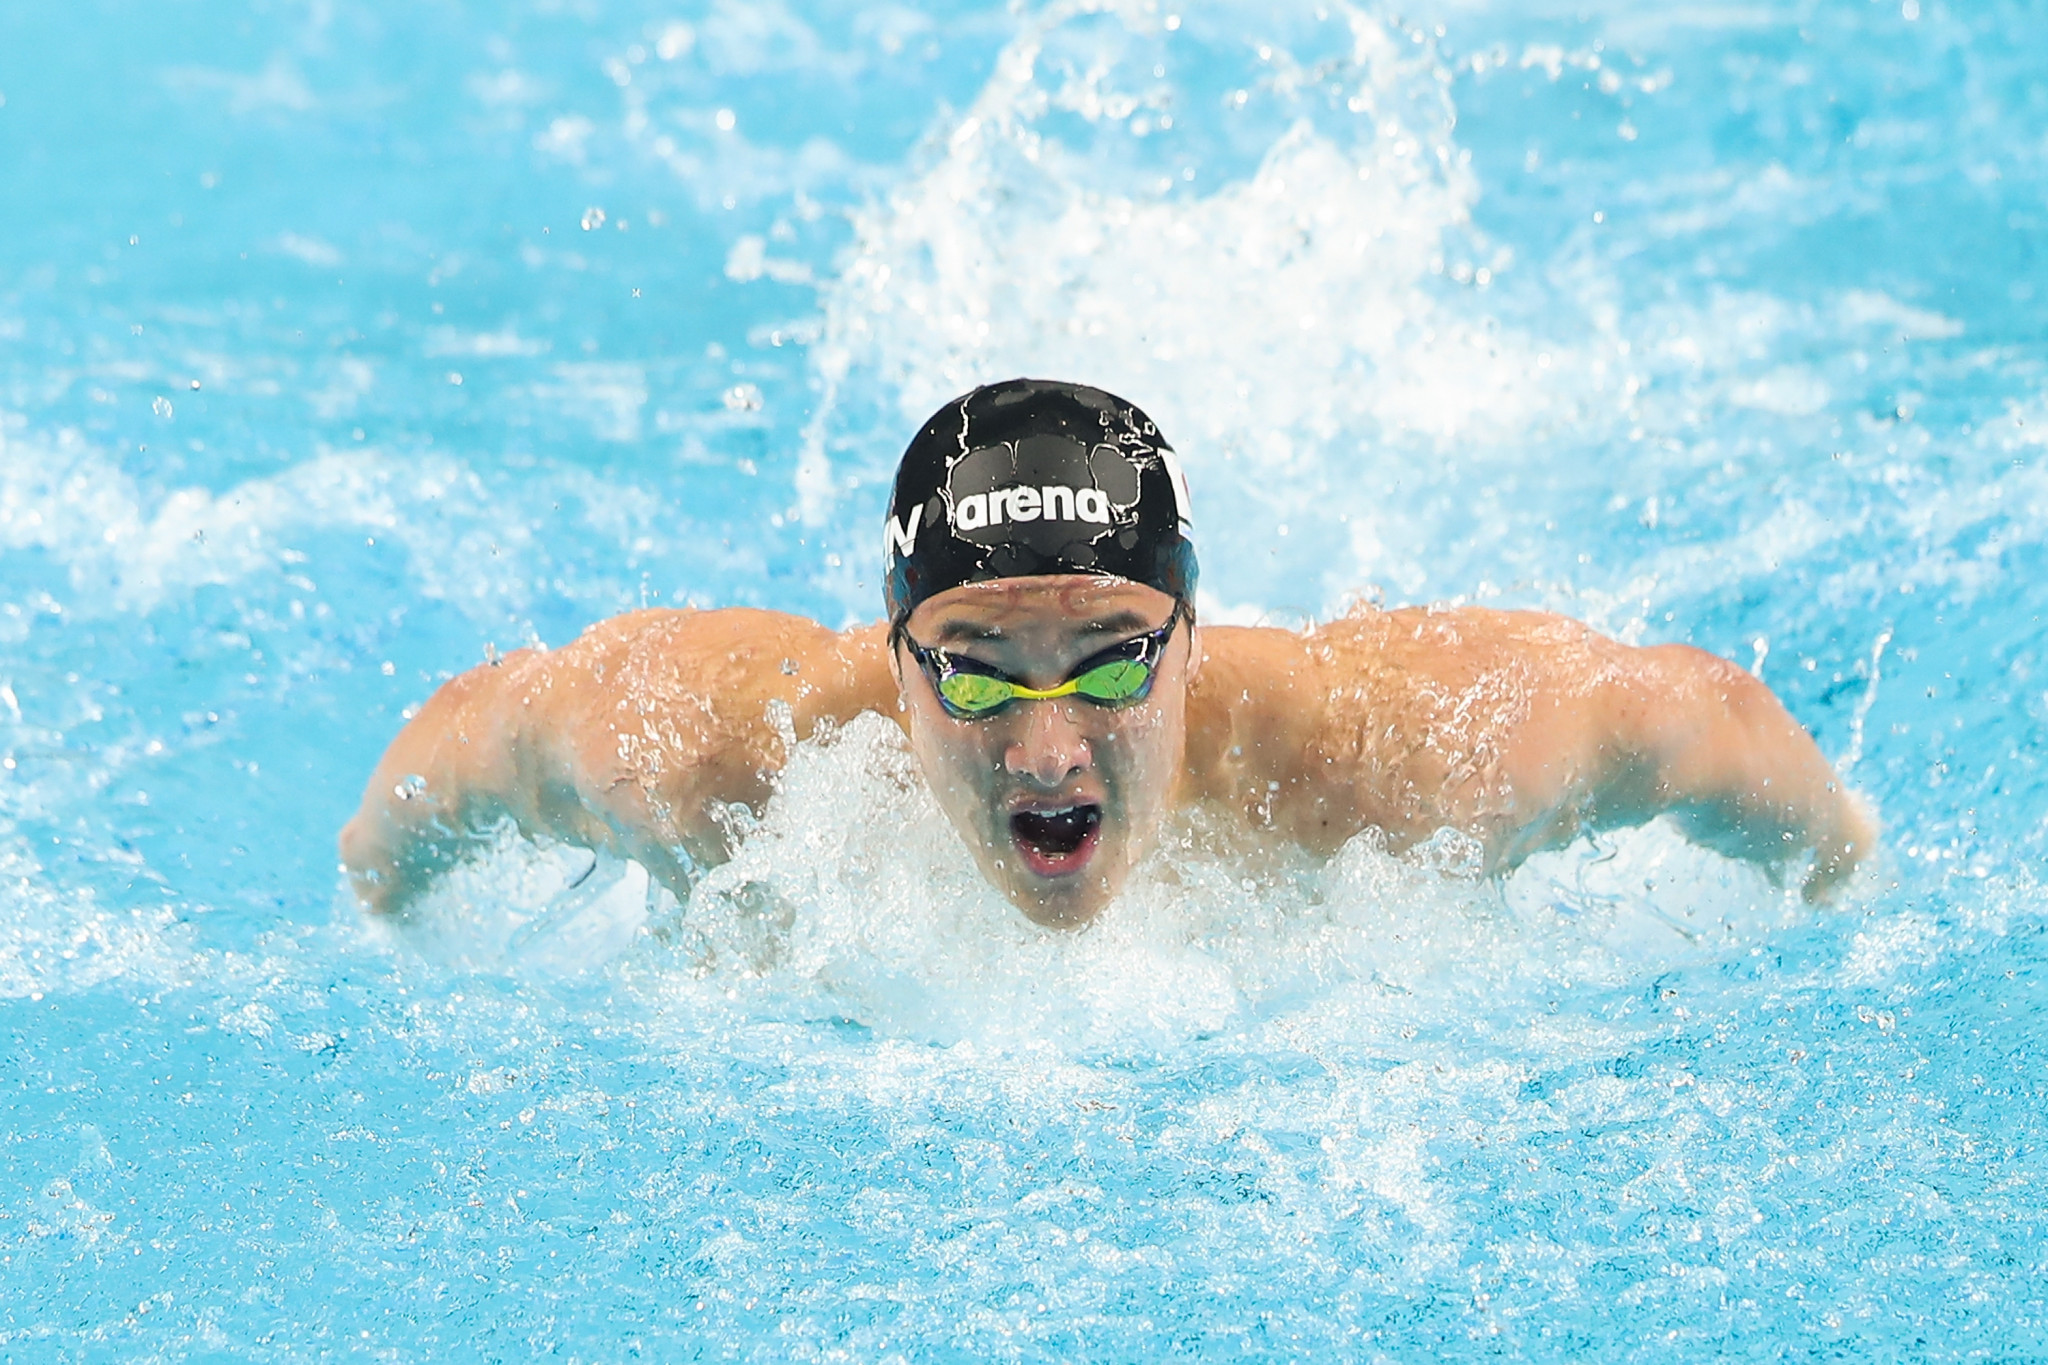 Daiya Seto has qualified for the Olympics in the men's 200m butterfly ©Getty Images